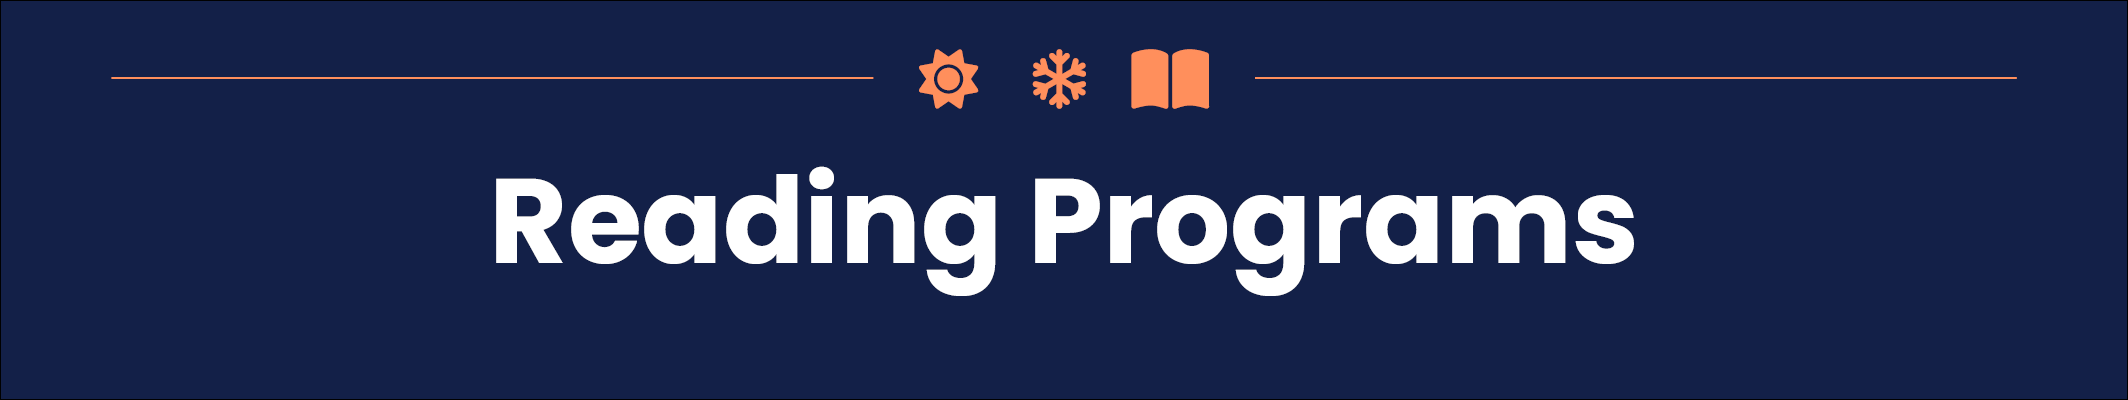 Reading Programs in white font in front of a dark blue background with orange icons of a sun, a snowflake and an open book